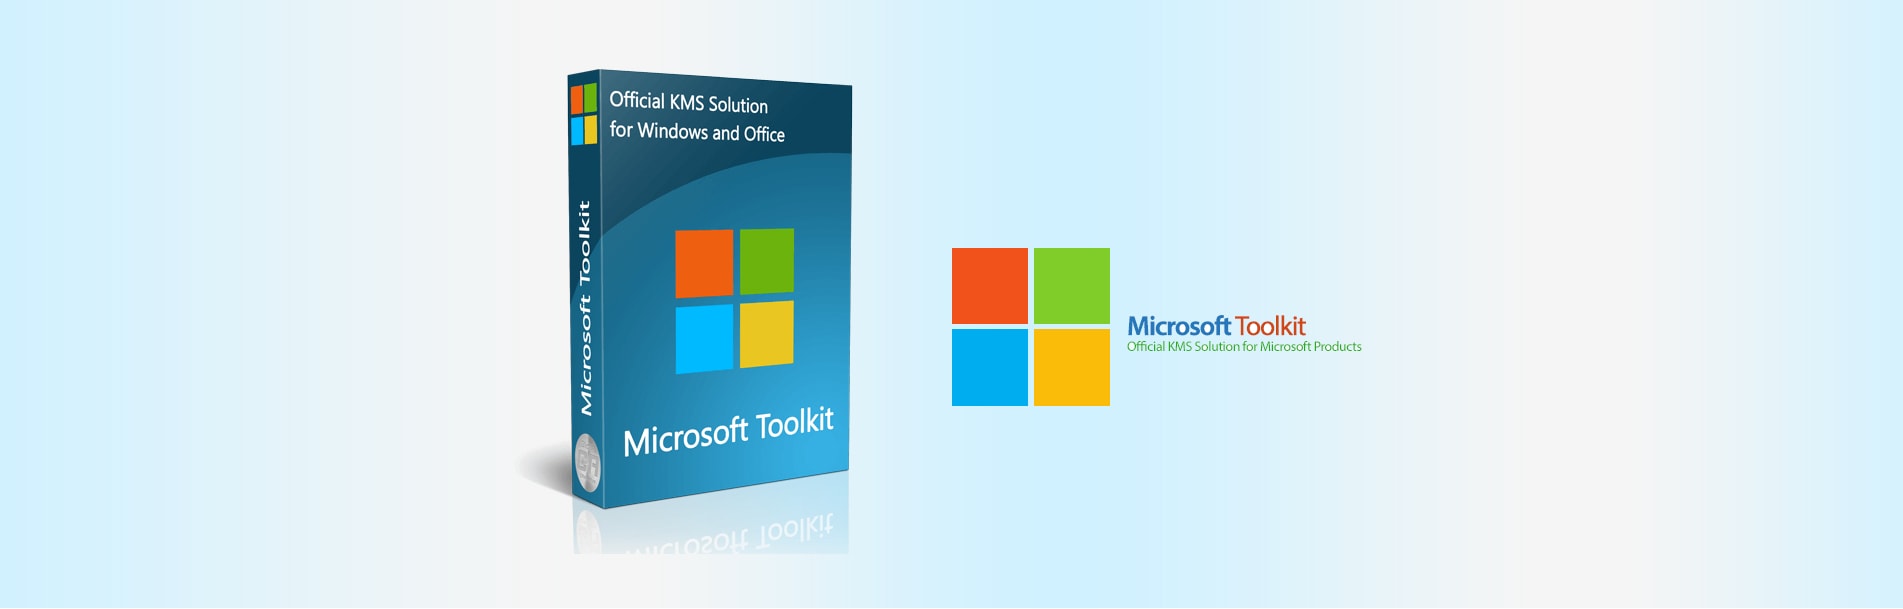 can microsoft toolkit activate office 2016